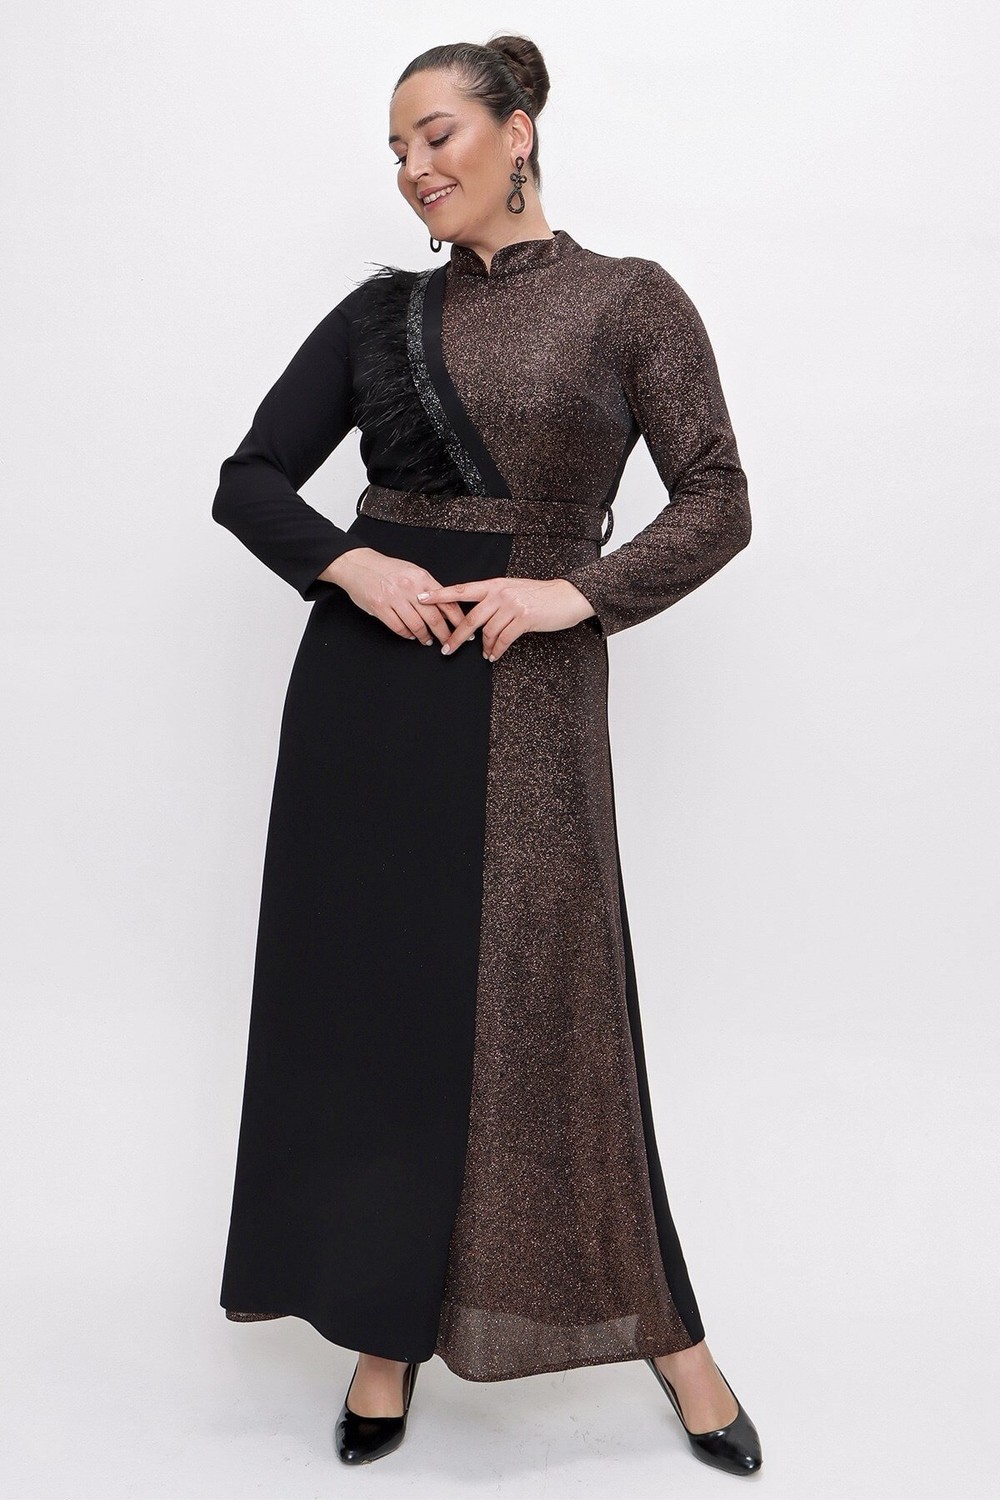 By Saygı A Big Size Collar Detail with Feather and Stones Belted Waist, Silvery Half Plus Size Long Dress Gold.